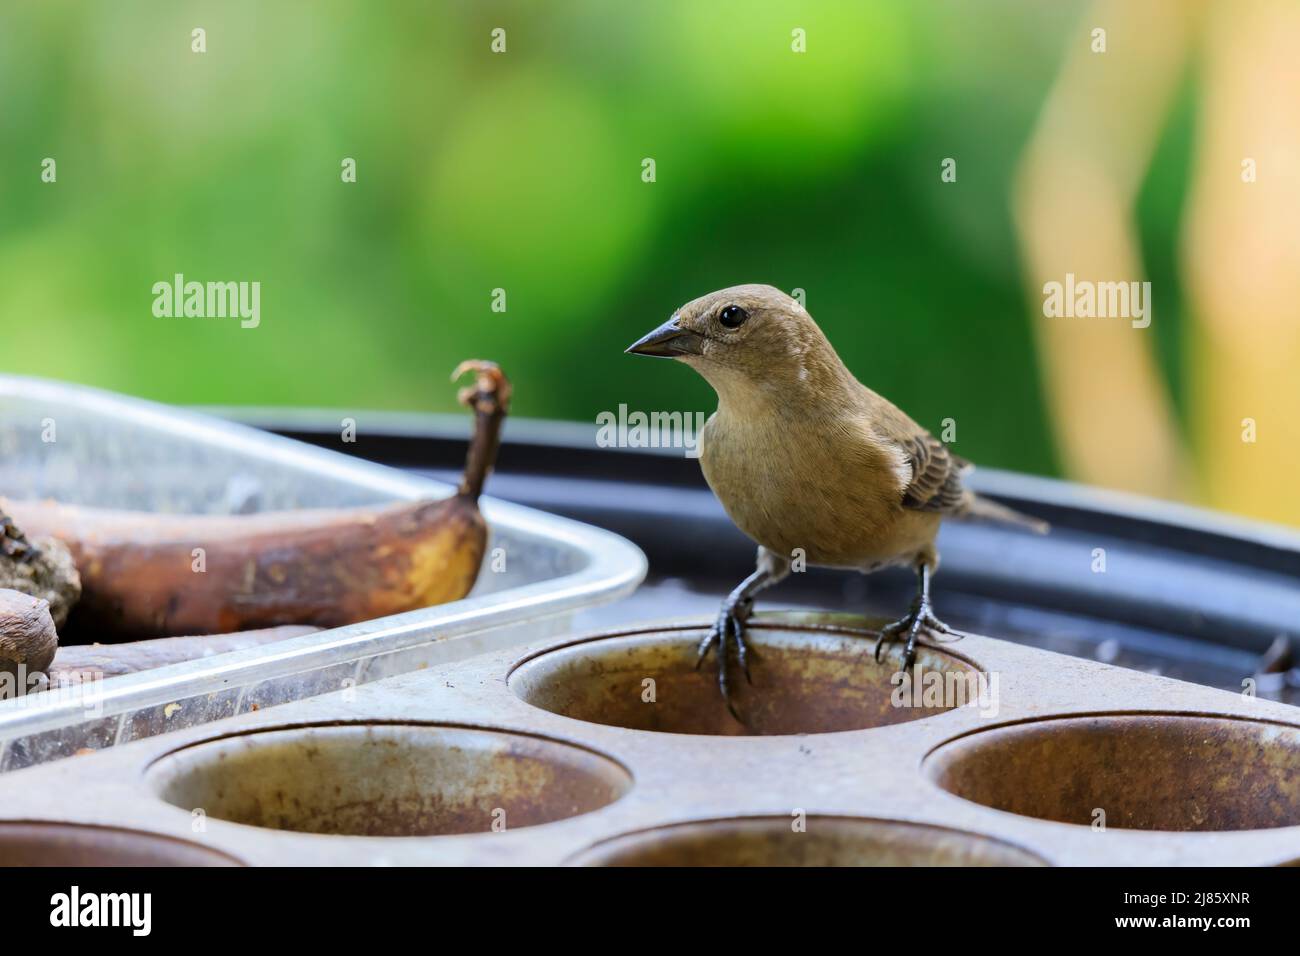 Female shiny cowbird perched on a muffing tray used as a feeding tray Stock Photo